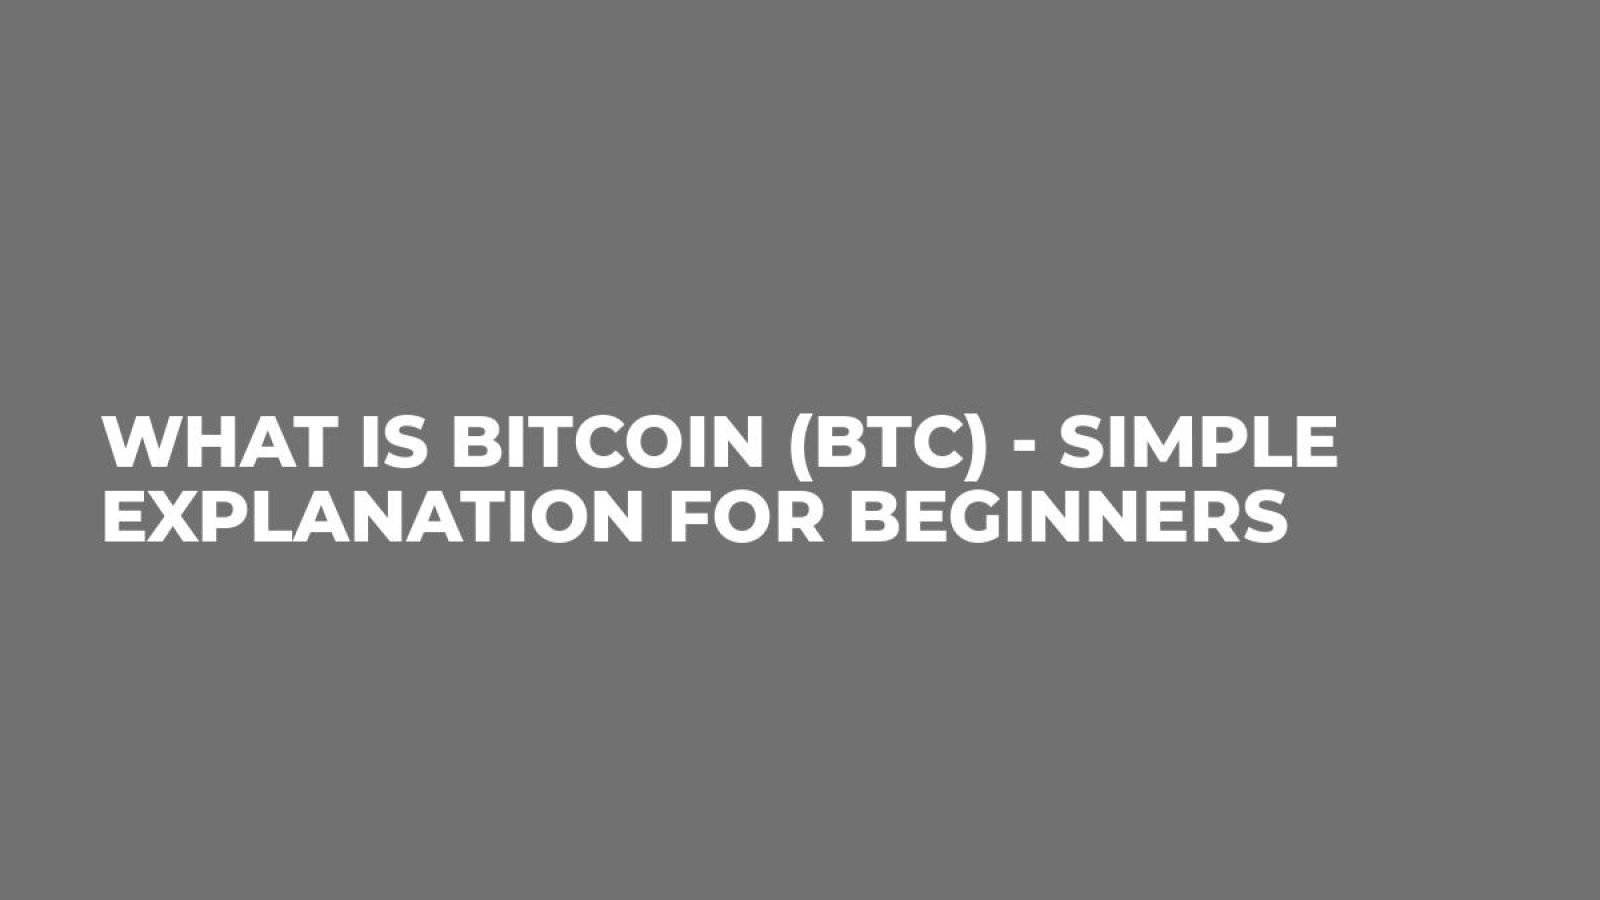 What is Bitcoin (BTC) - Simple Explanation for Beginners